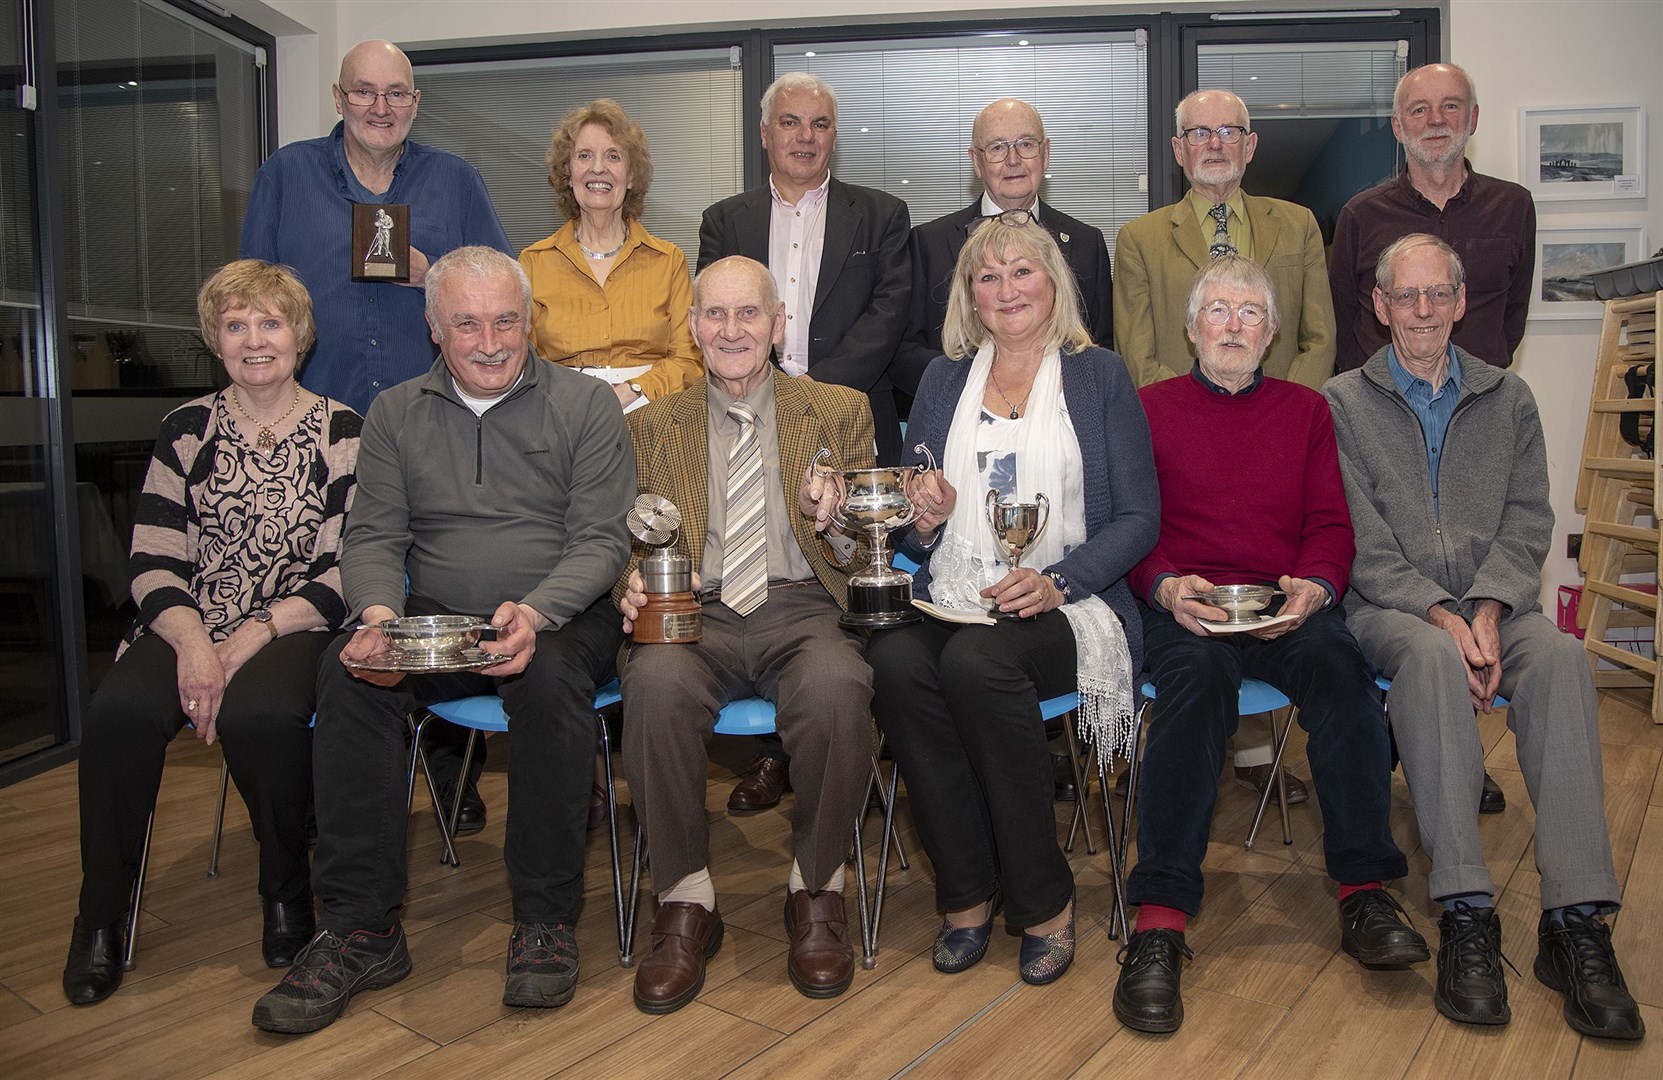 Dingwall Camera Club Prizewinners Back (l to r) Brian Alexander, Pat Smith, Mark Janes, Willie Skinner, Sander Macdonald and Keith Barnes. Front (l to r) Joyce White, Iain Cathro, Donnie Smith, Bozent Kaljeta Summers, Andrew James and John Simpson. Pic - Phil Downie